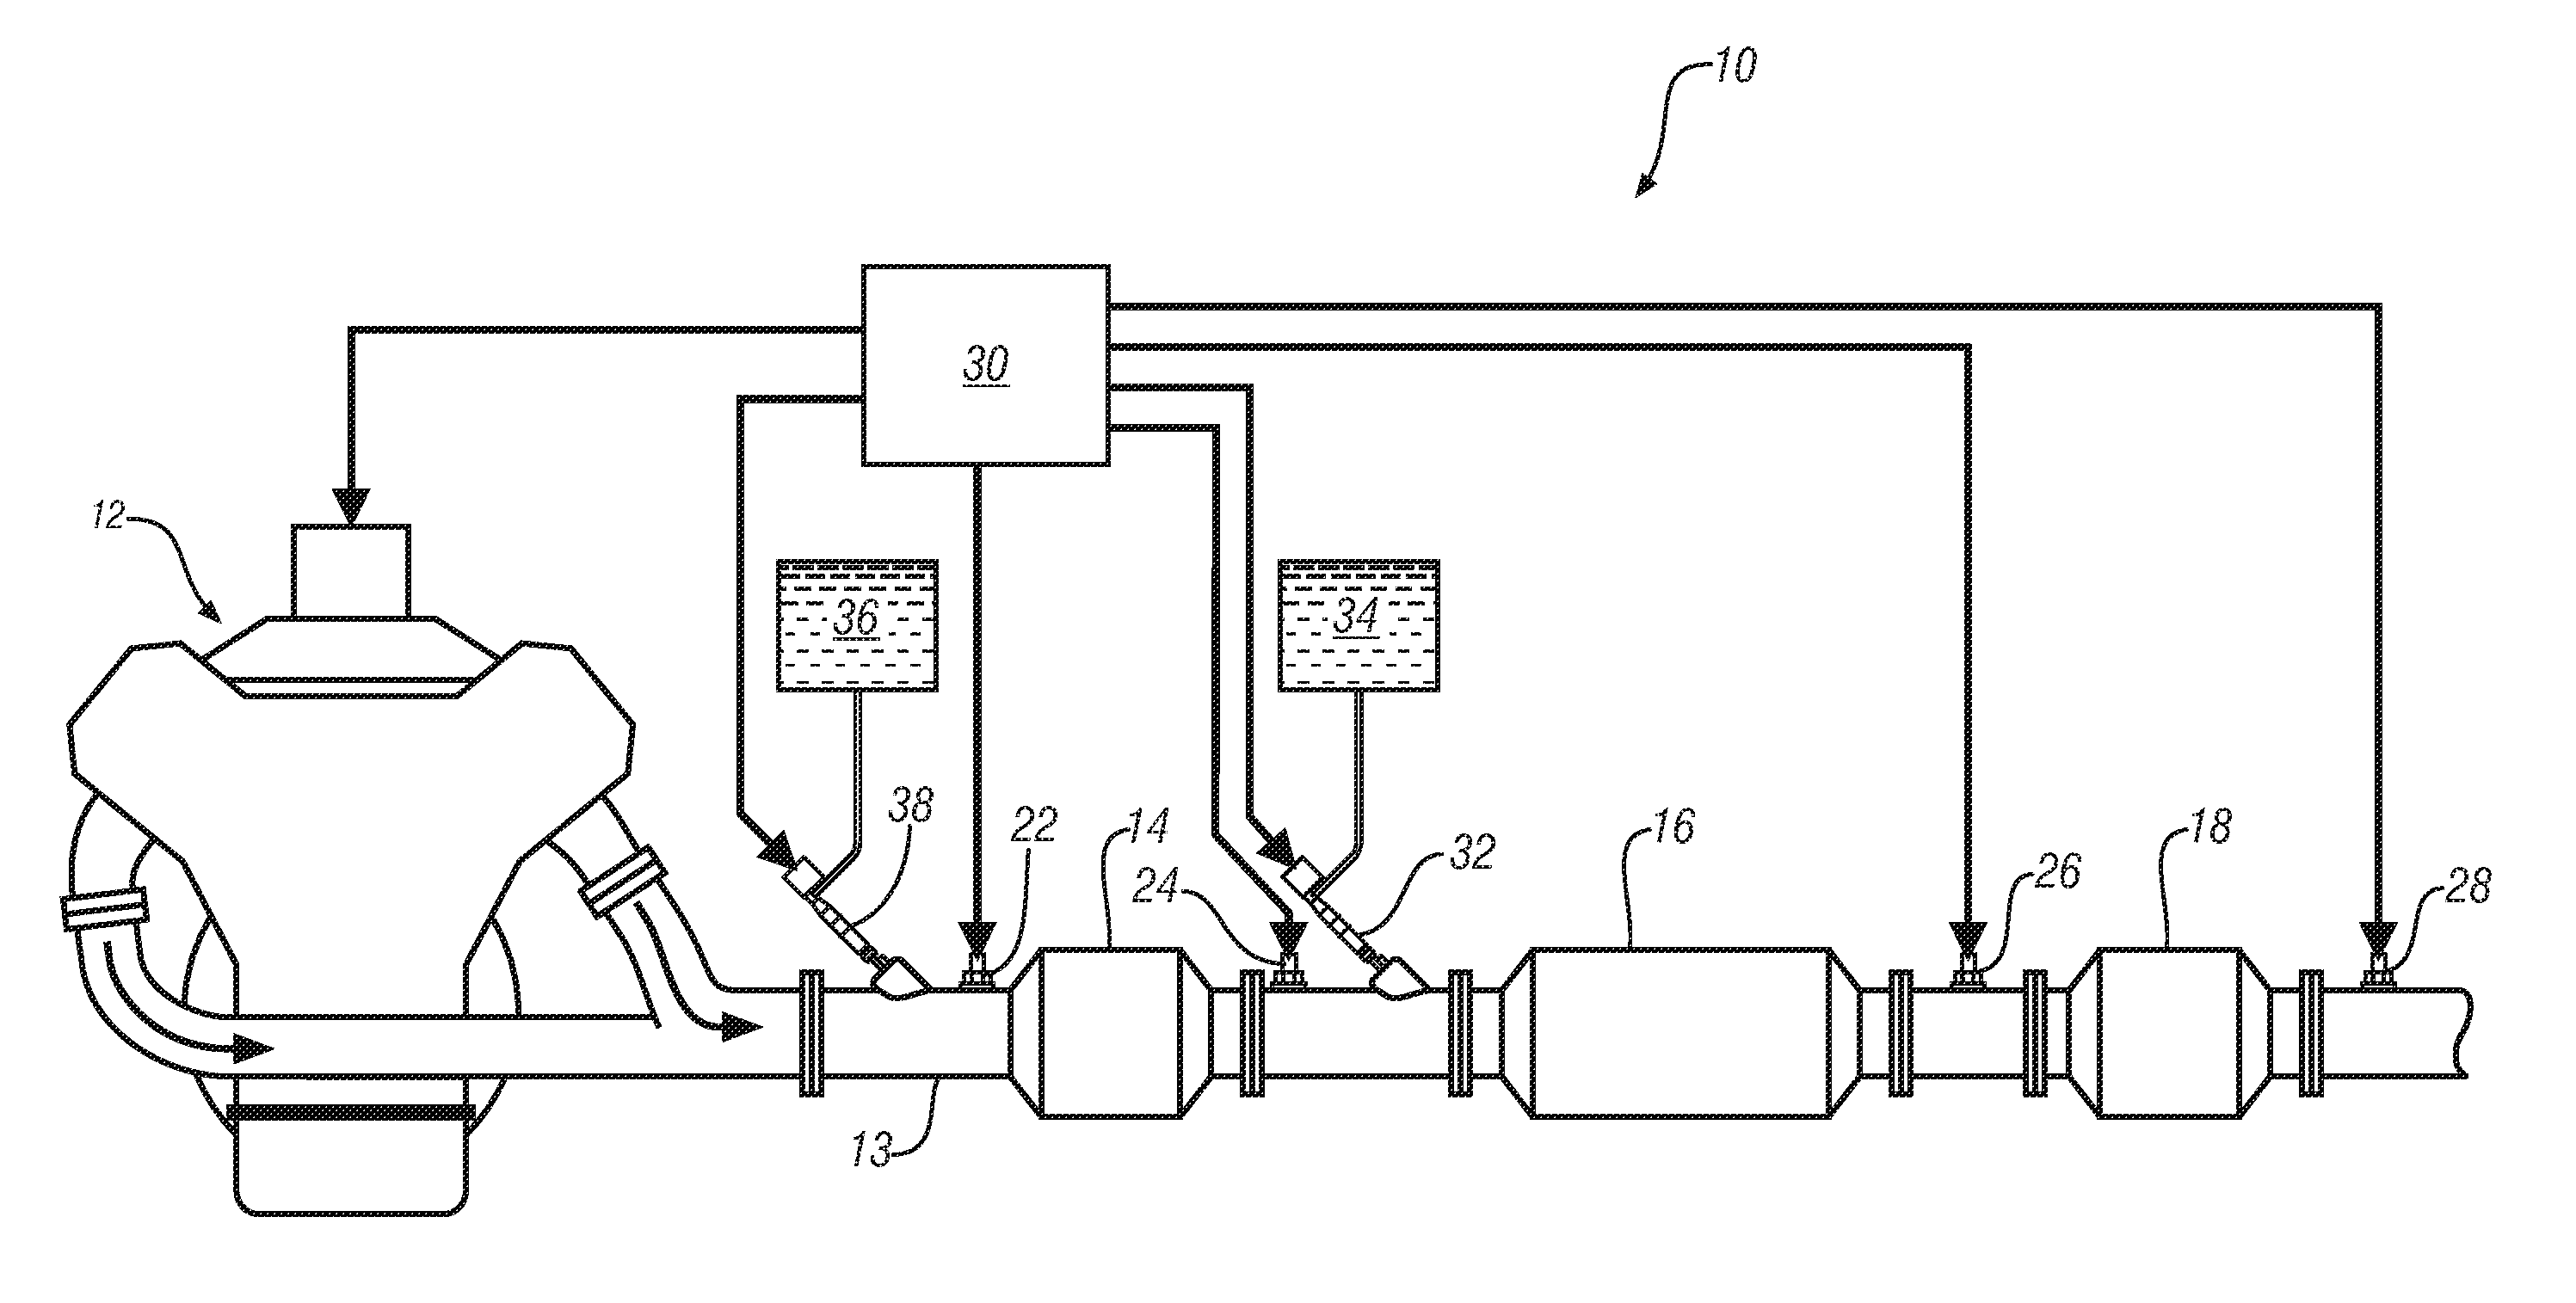 Apparatus and method for onboard performance monitoring of oxidation catalyst